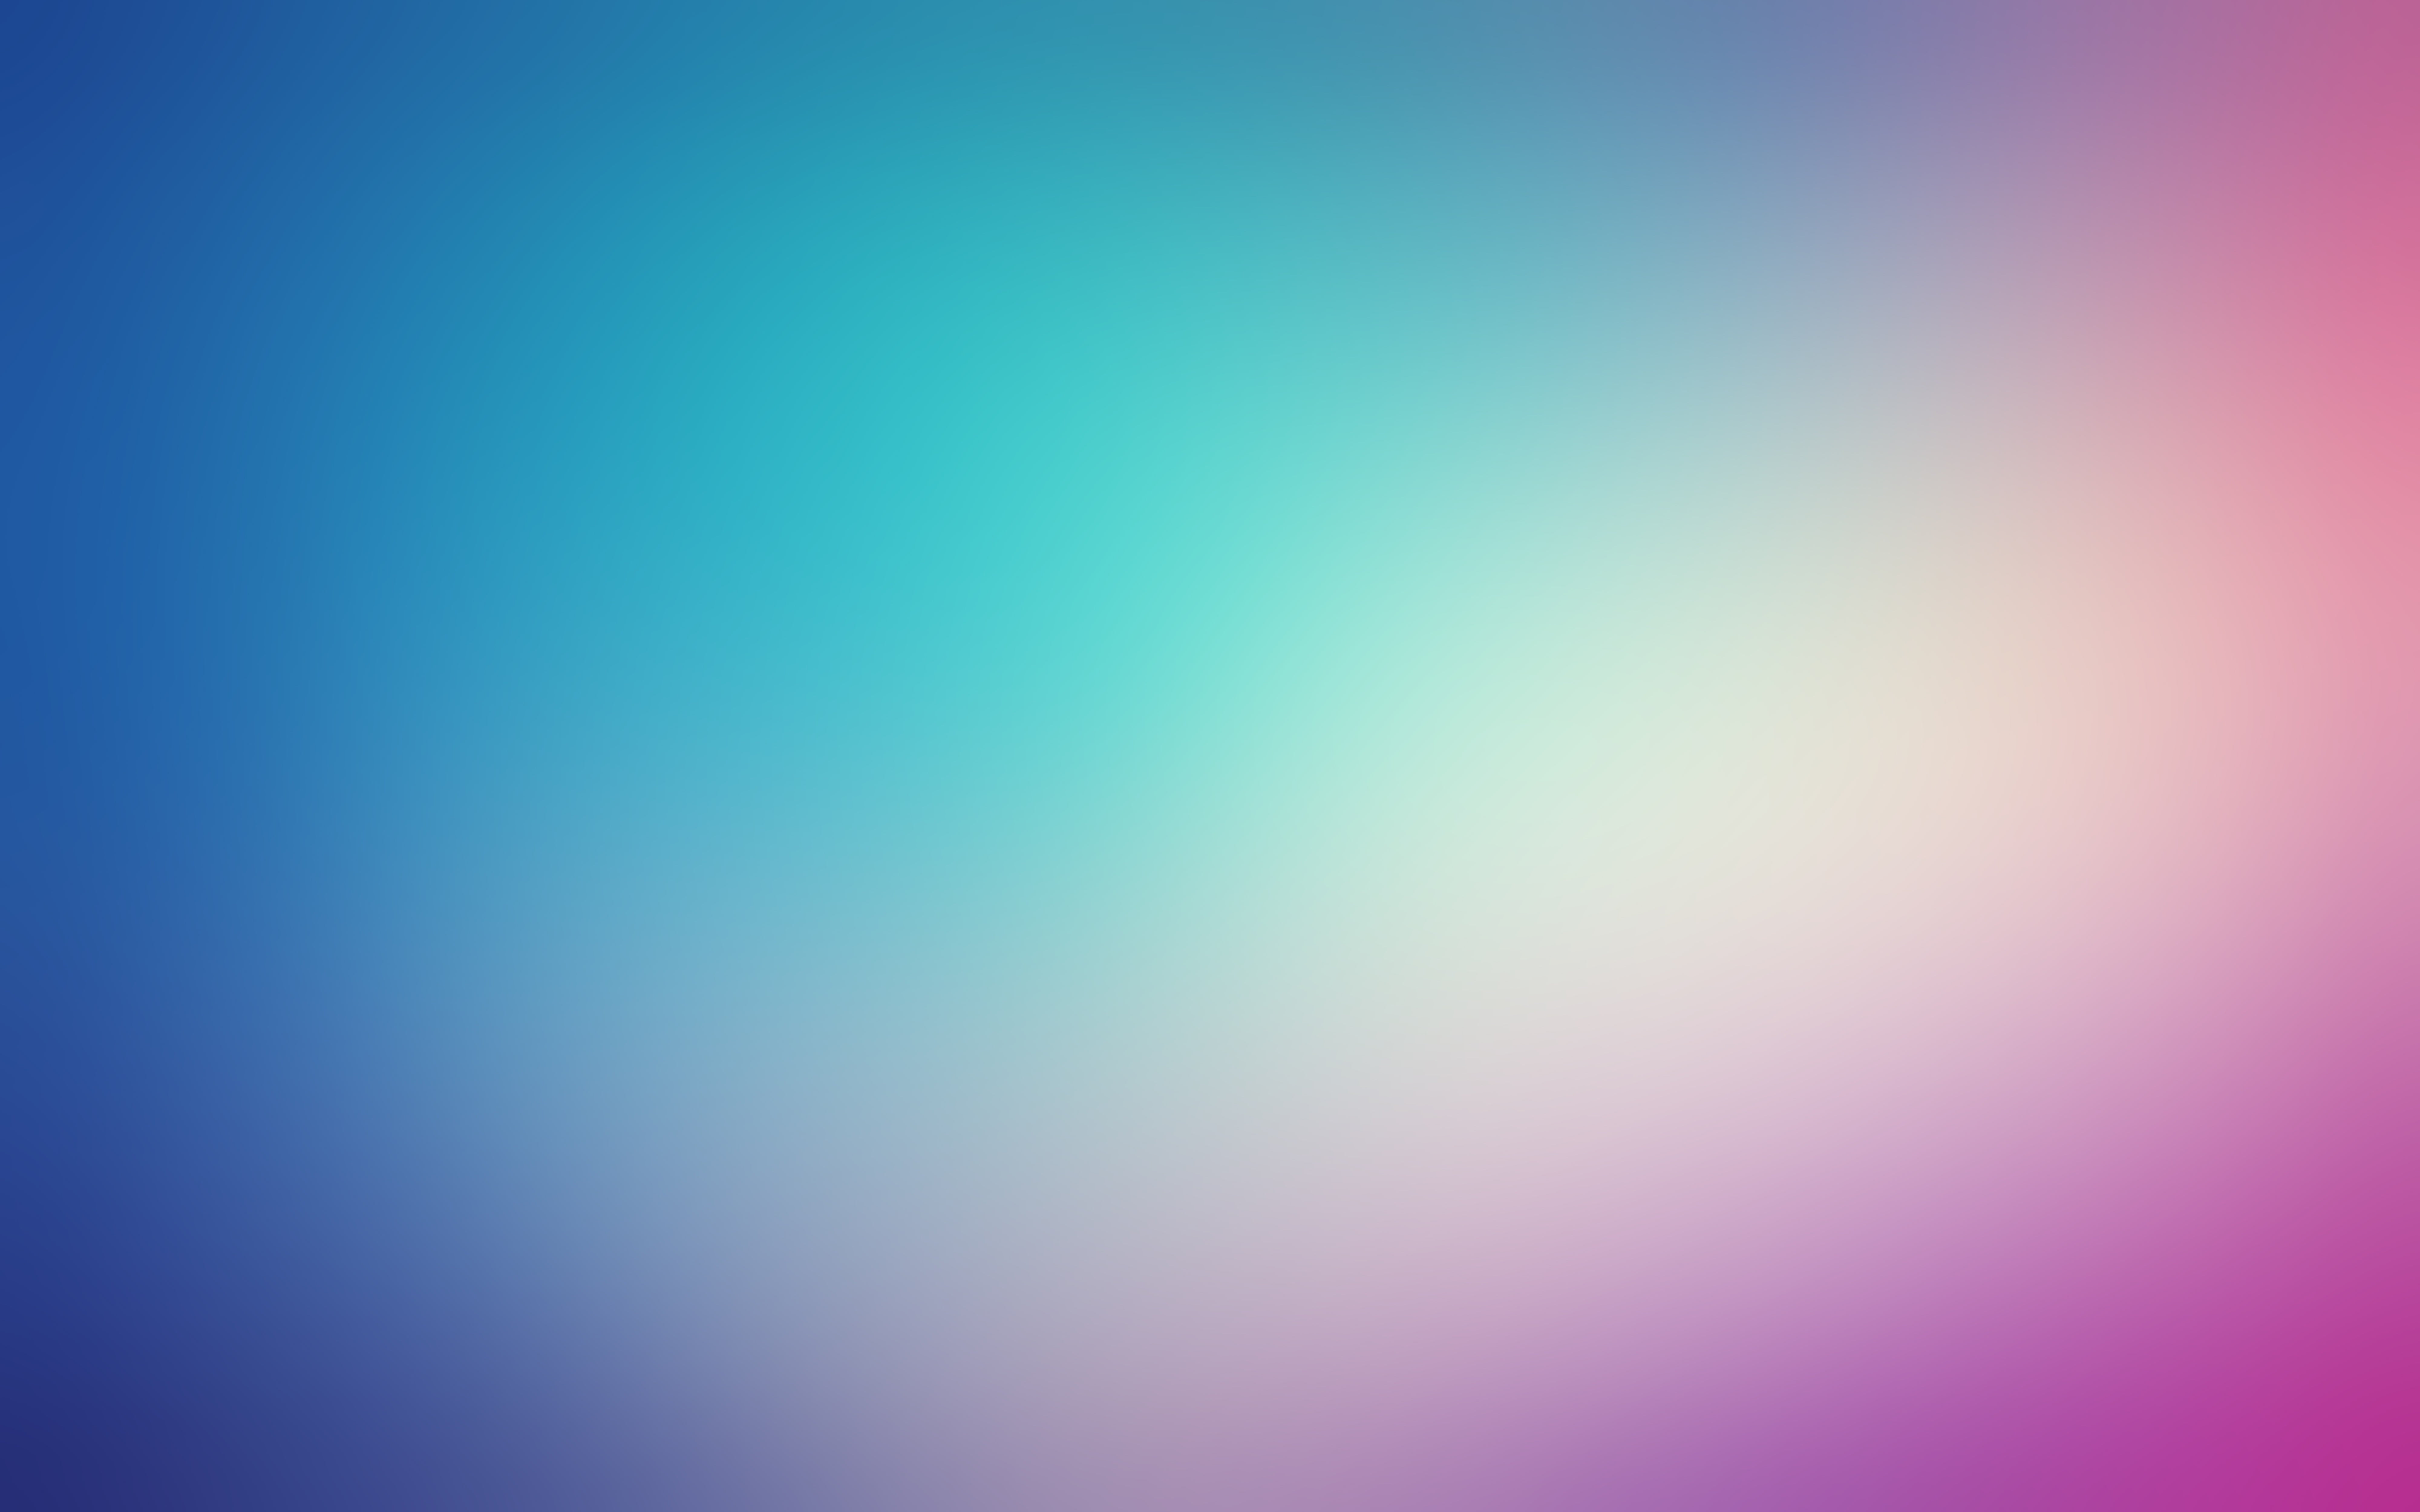 Blurry, Colorful, Blue, Pink